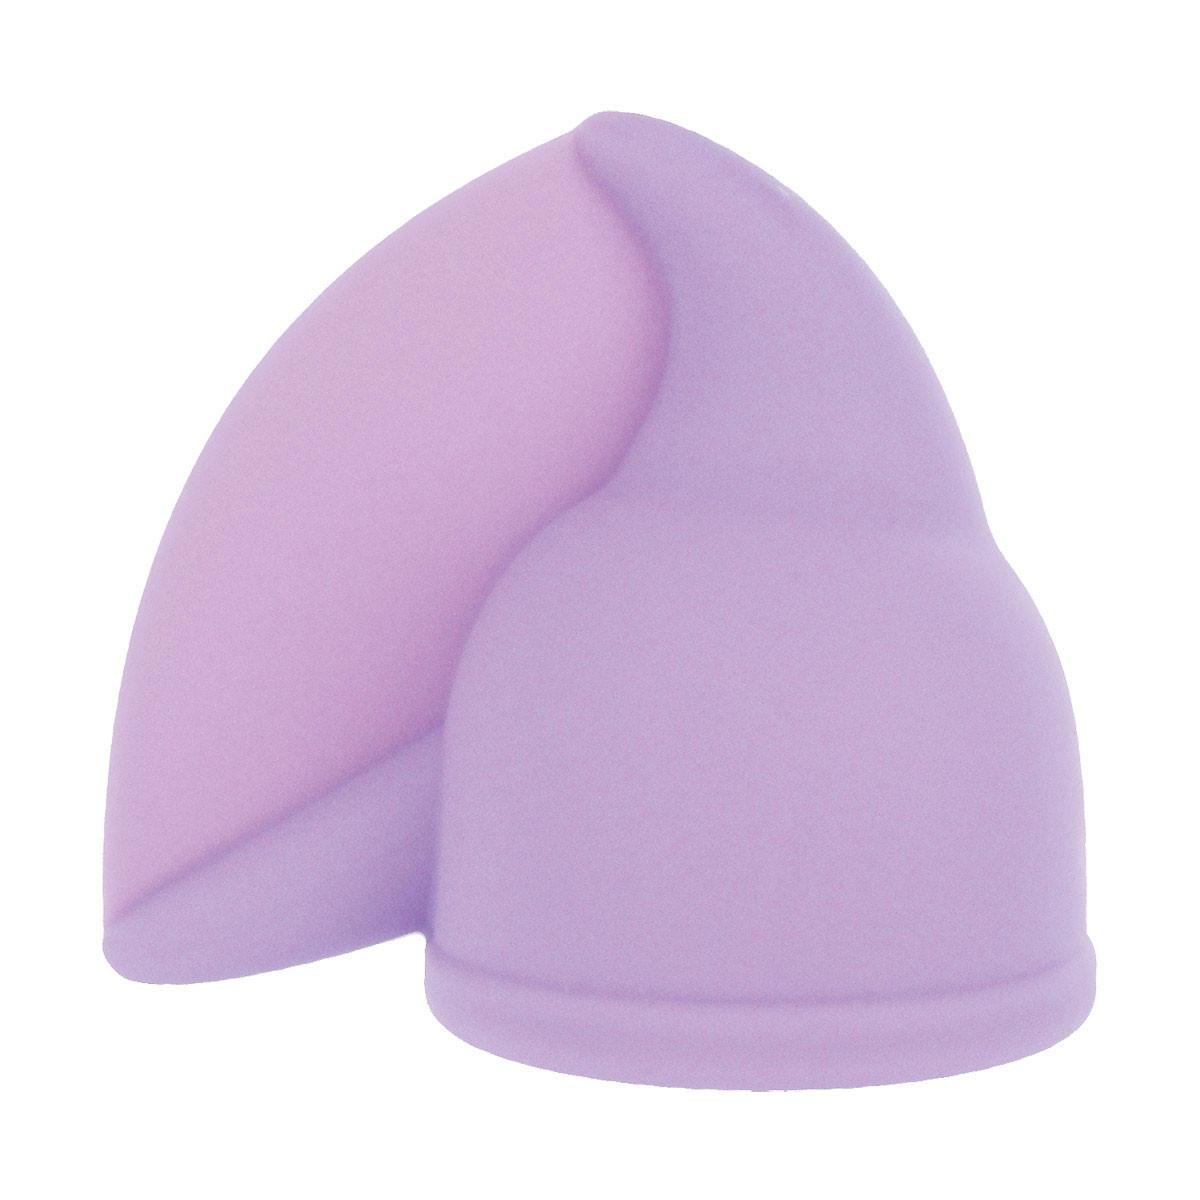 Flutter Tip Silicone Wand Massager Attachment by Wand Essentials - Hamilton Park Electronics